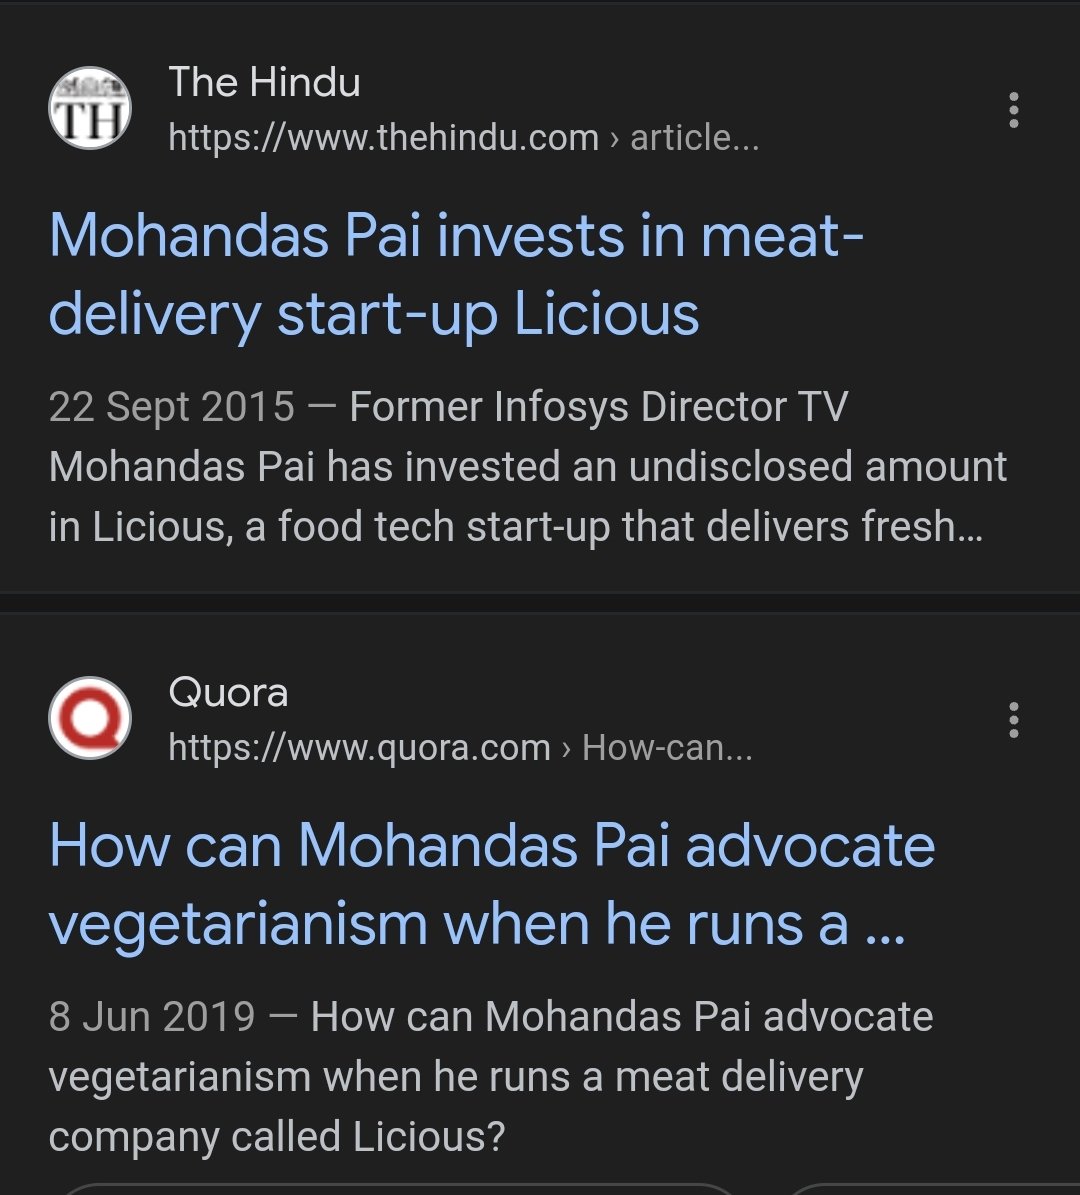 TV Mohandas Pai, a clown who has investments in the meat company Licious, is going around scolding people like @sardesairajdeep for eating meat during Navratras. Has Licious suspended its operations for these nine days? The answer is no. Sanghi clowns = biggest hypocrites.